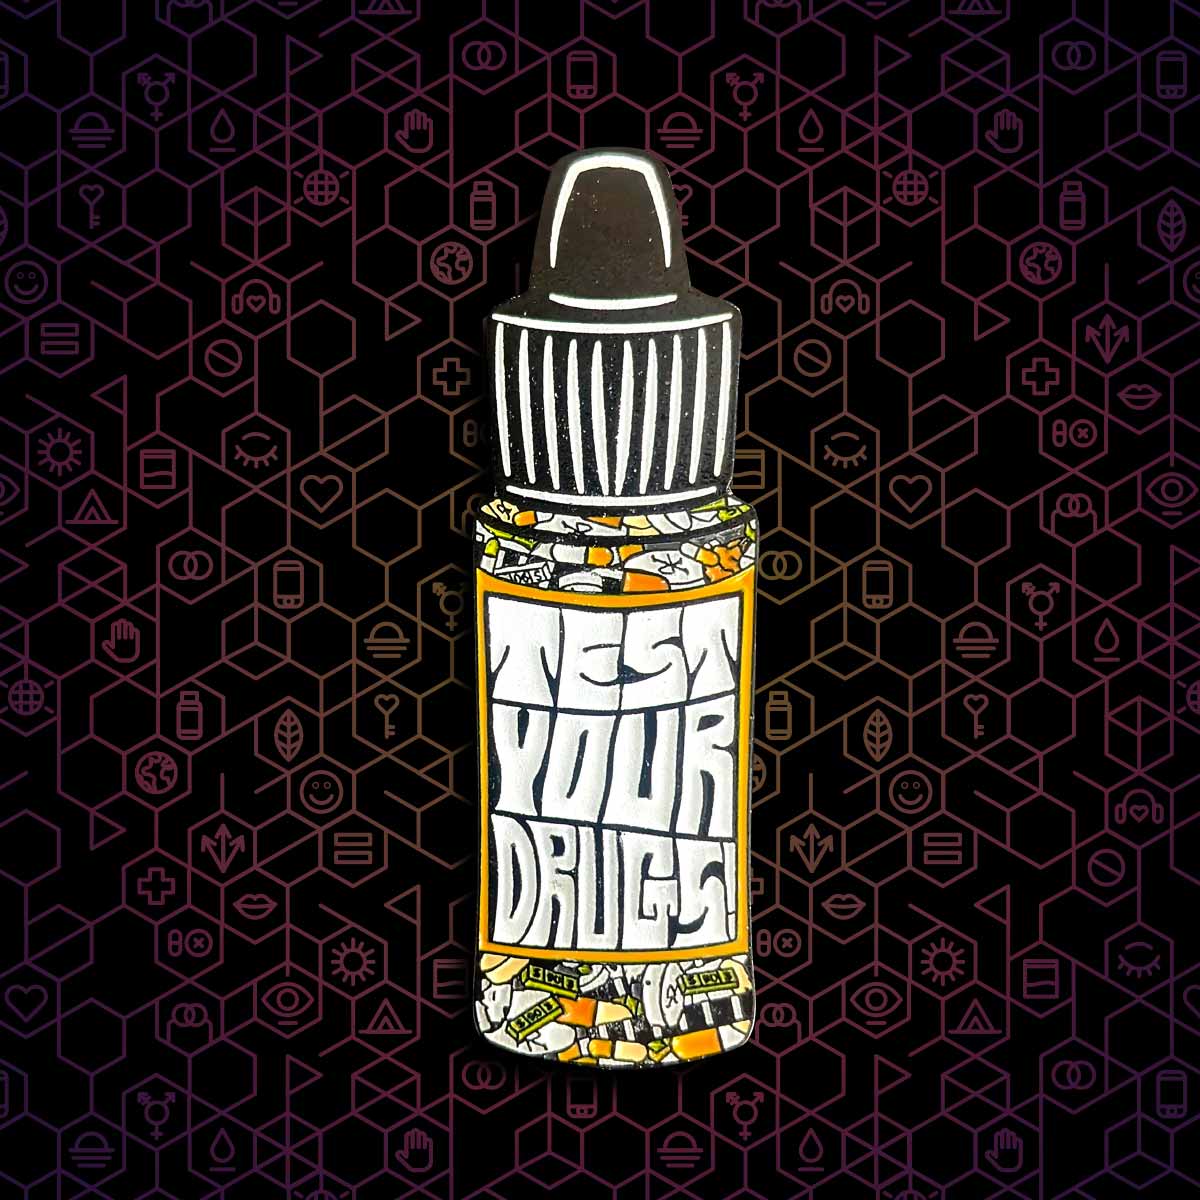 Reagent bottle-shaped pin that says "Test your drugs" on a dark hexagonal background.